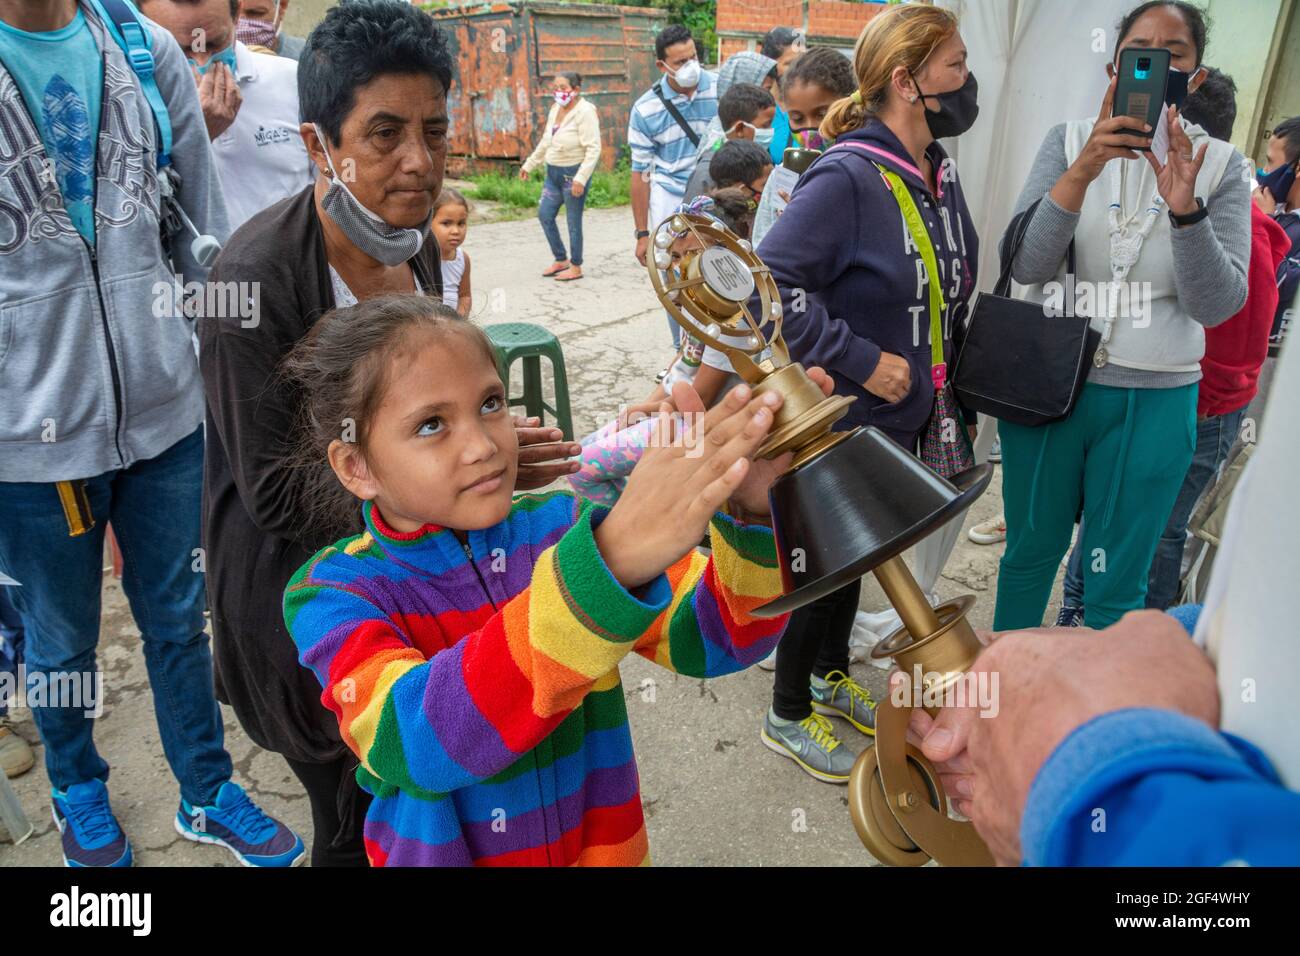 A girl touches with her hands the relic of Blessed Jose Gregorio Hernandez, for his blessing.  Relic of Blessed José Gregorio Hernández. Caracas, Vene Stock Photo